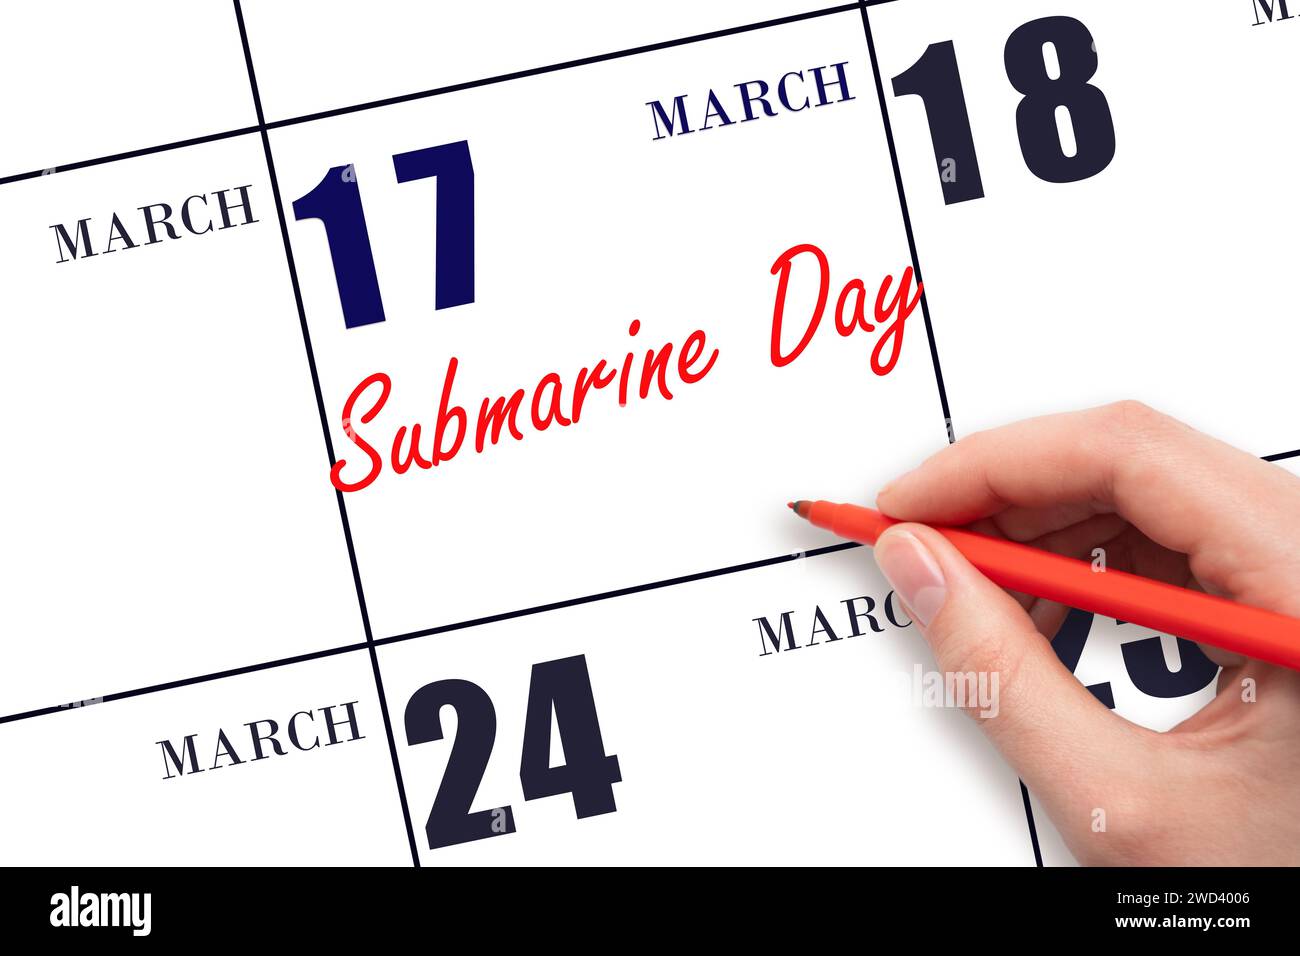 March 17. Hand writing text Submarine Day on calendar date. Save the date. Holiday.  Day of the year concept. Stock Photo